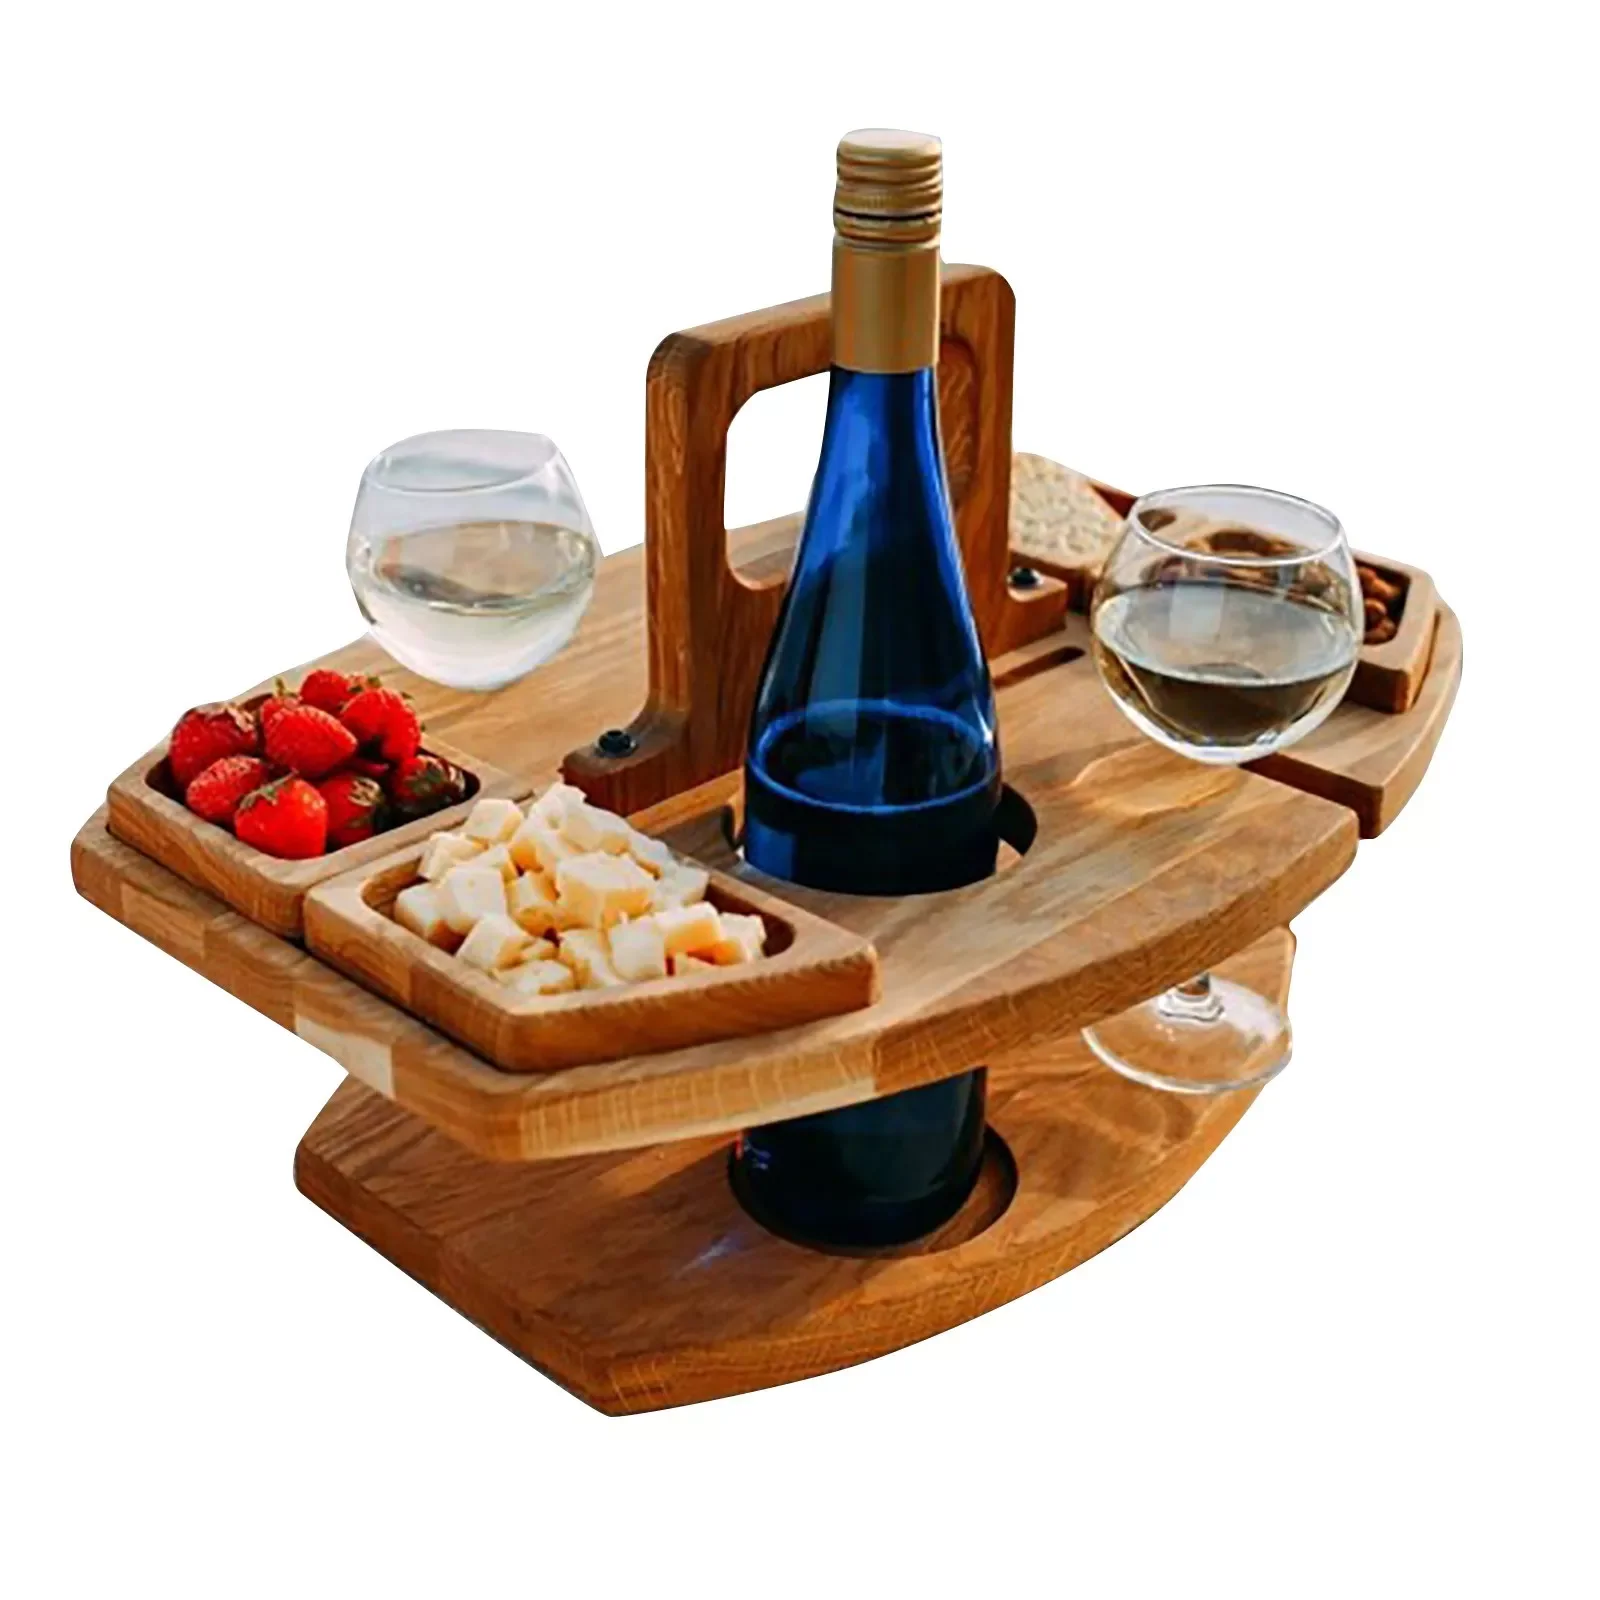 

2023 Portable Wooden Tables Outdoor Picnic Wine Table With Handle Small Folding Beach Table Retractable Legs Snack Cheese Tray #